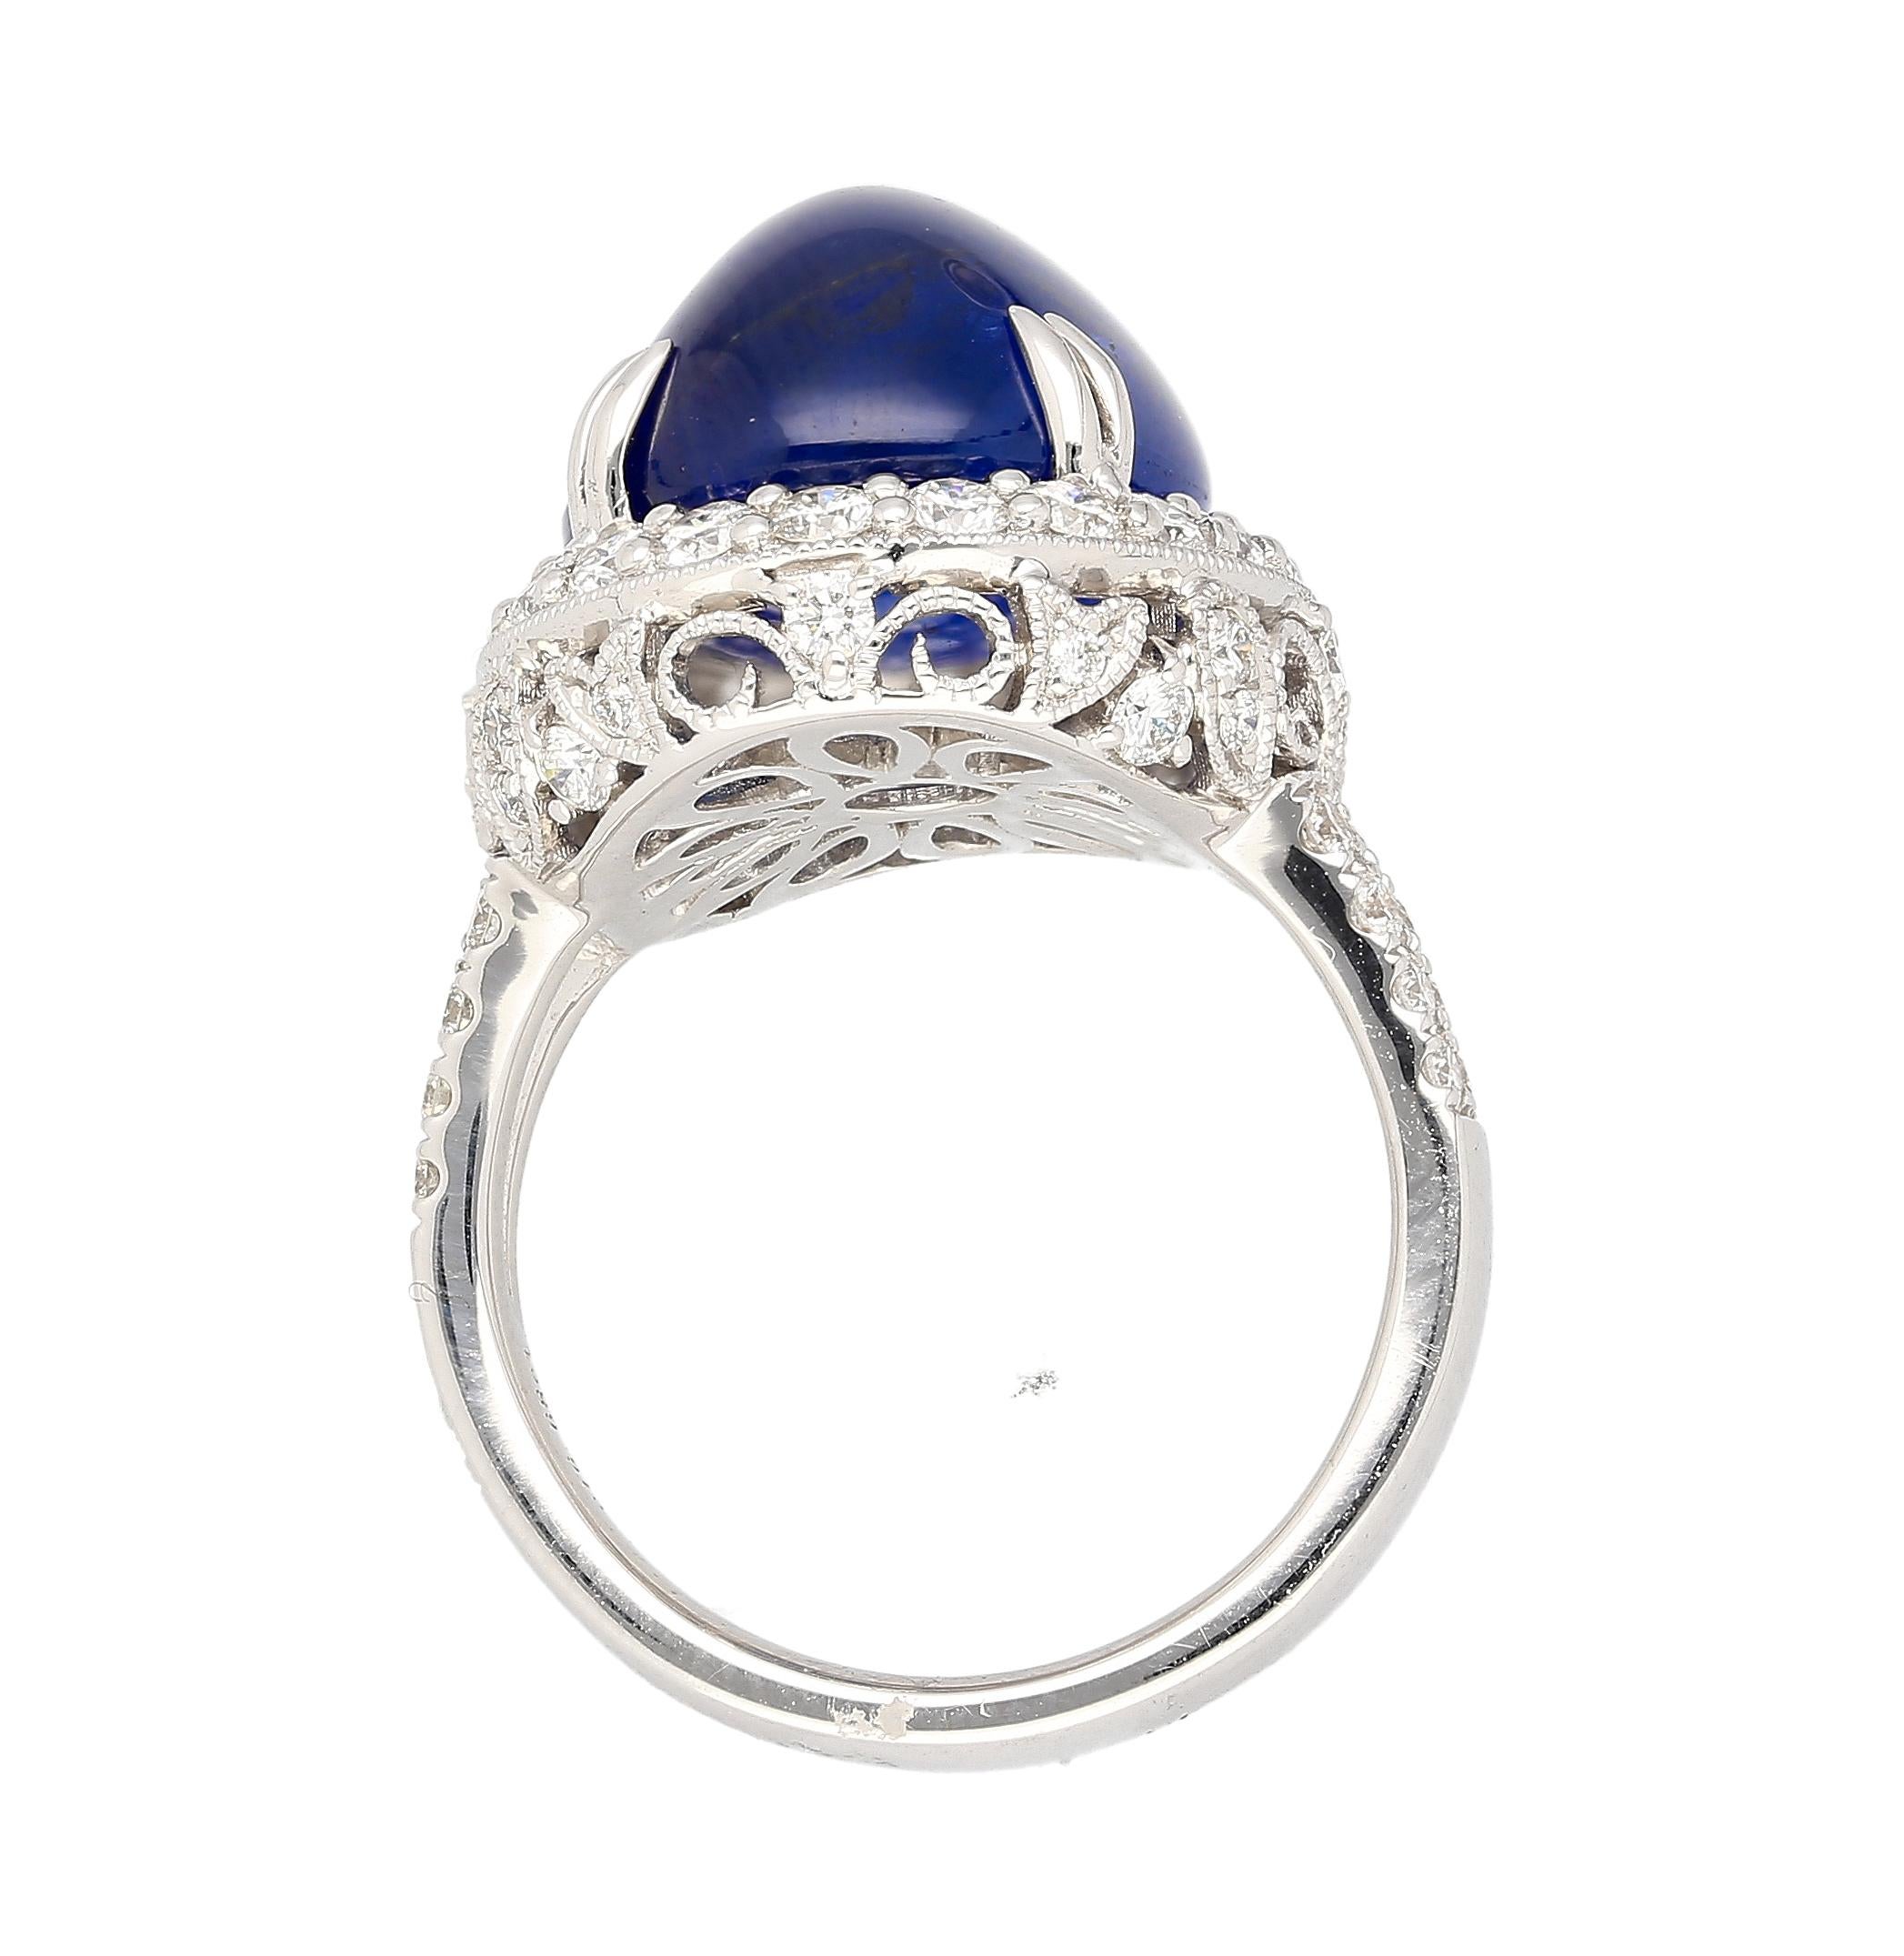 Oval Cut AGL Certified 16.68 Carat Cabochon Ceylon Blue Sapphire Ring with Diamond Halo For Sale